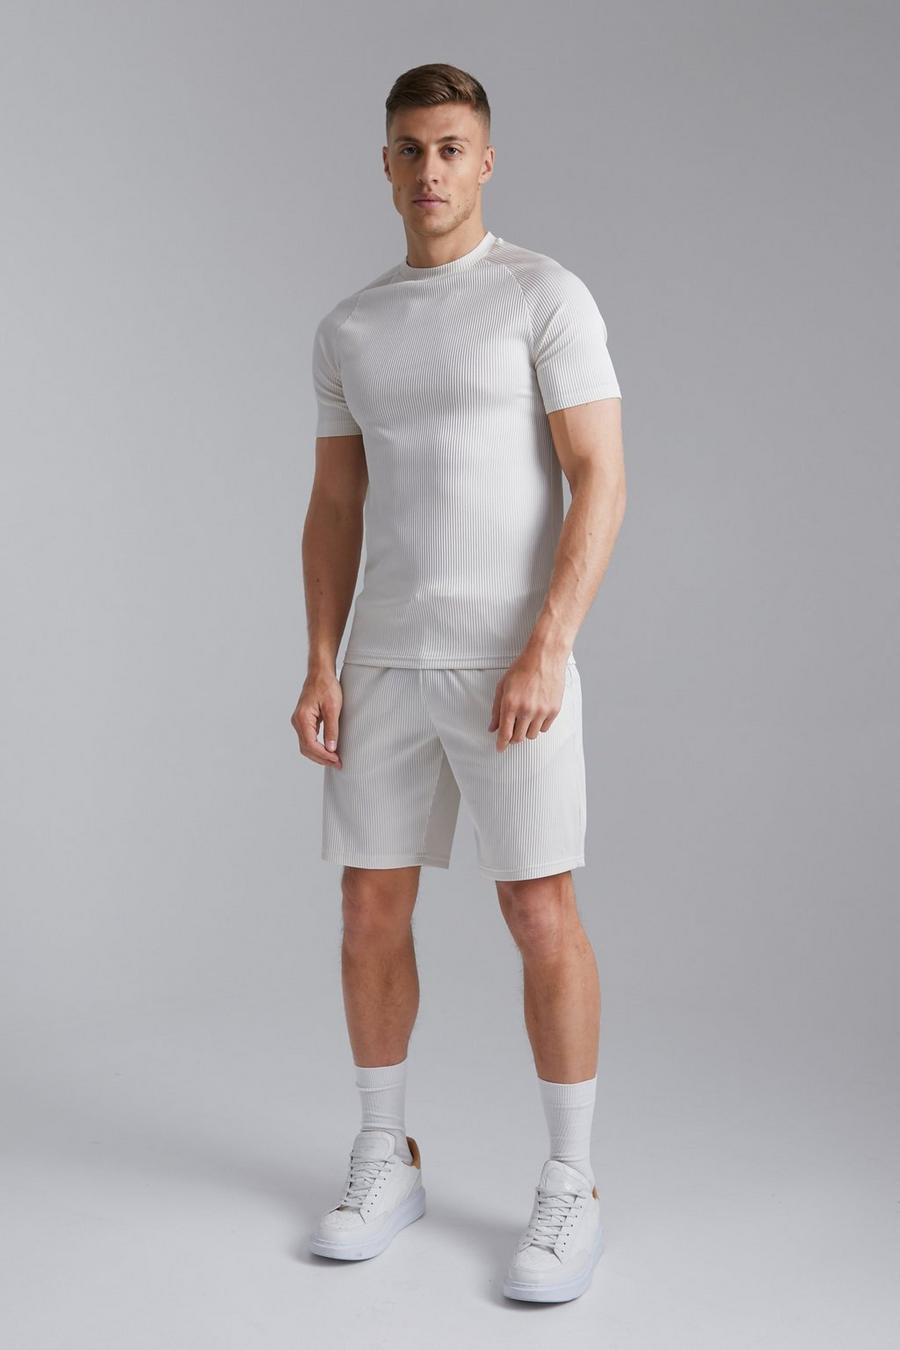 Stone beige T-shirt i muscle fit och shorts image number 1